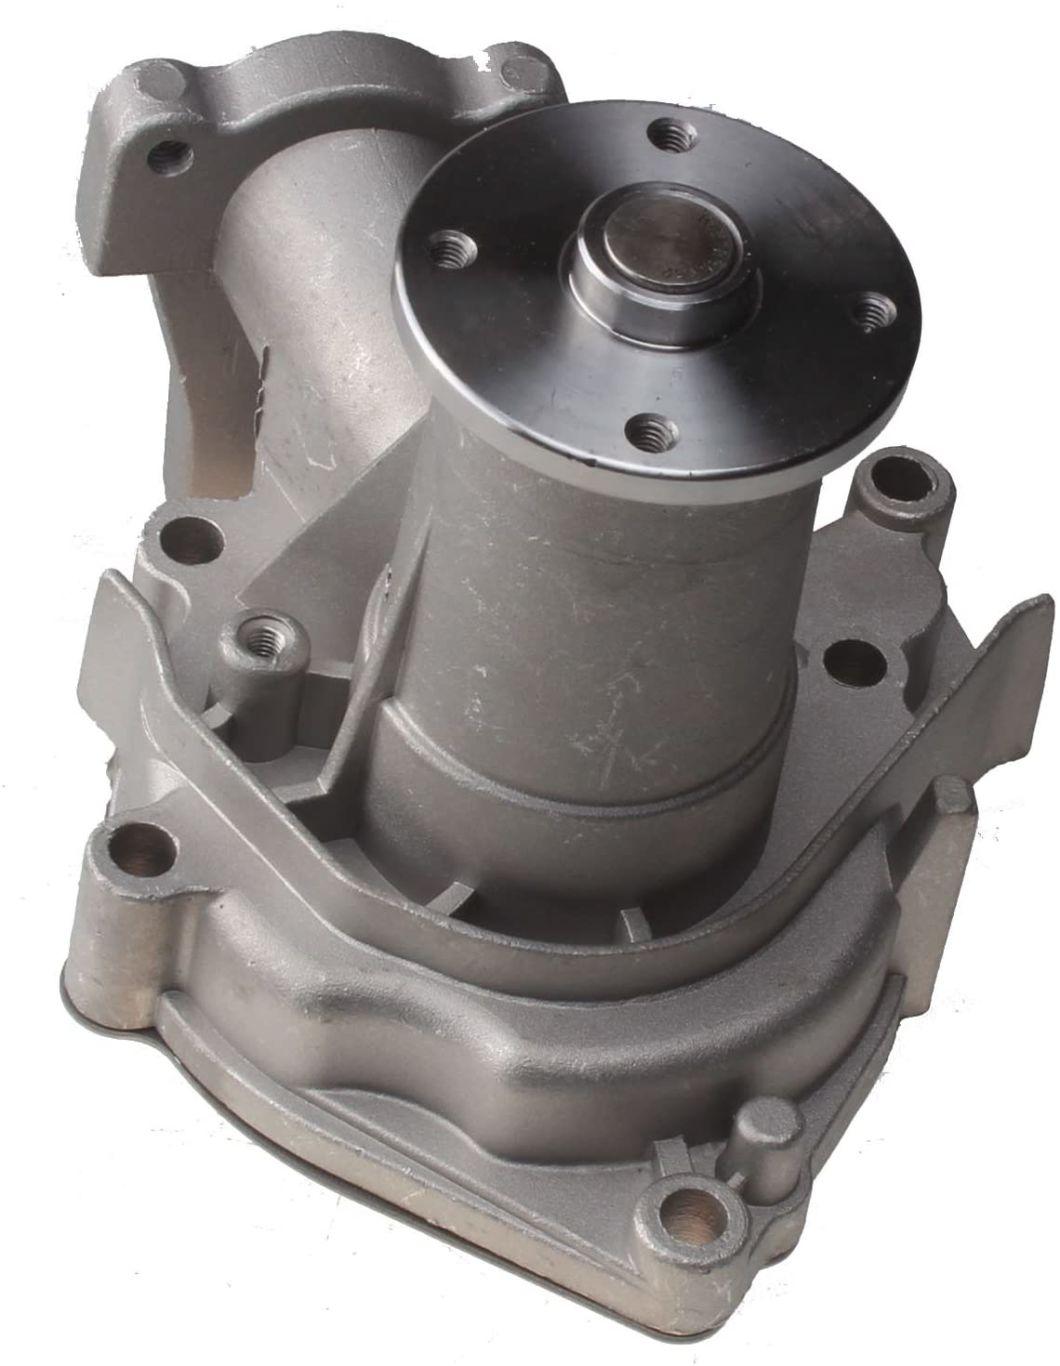 Forklift Parts Water Pump 25100-42540 25100-42541 for Mitsubishi D4bb/AG45/AG44